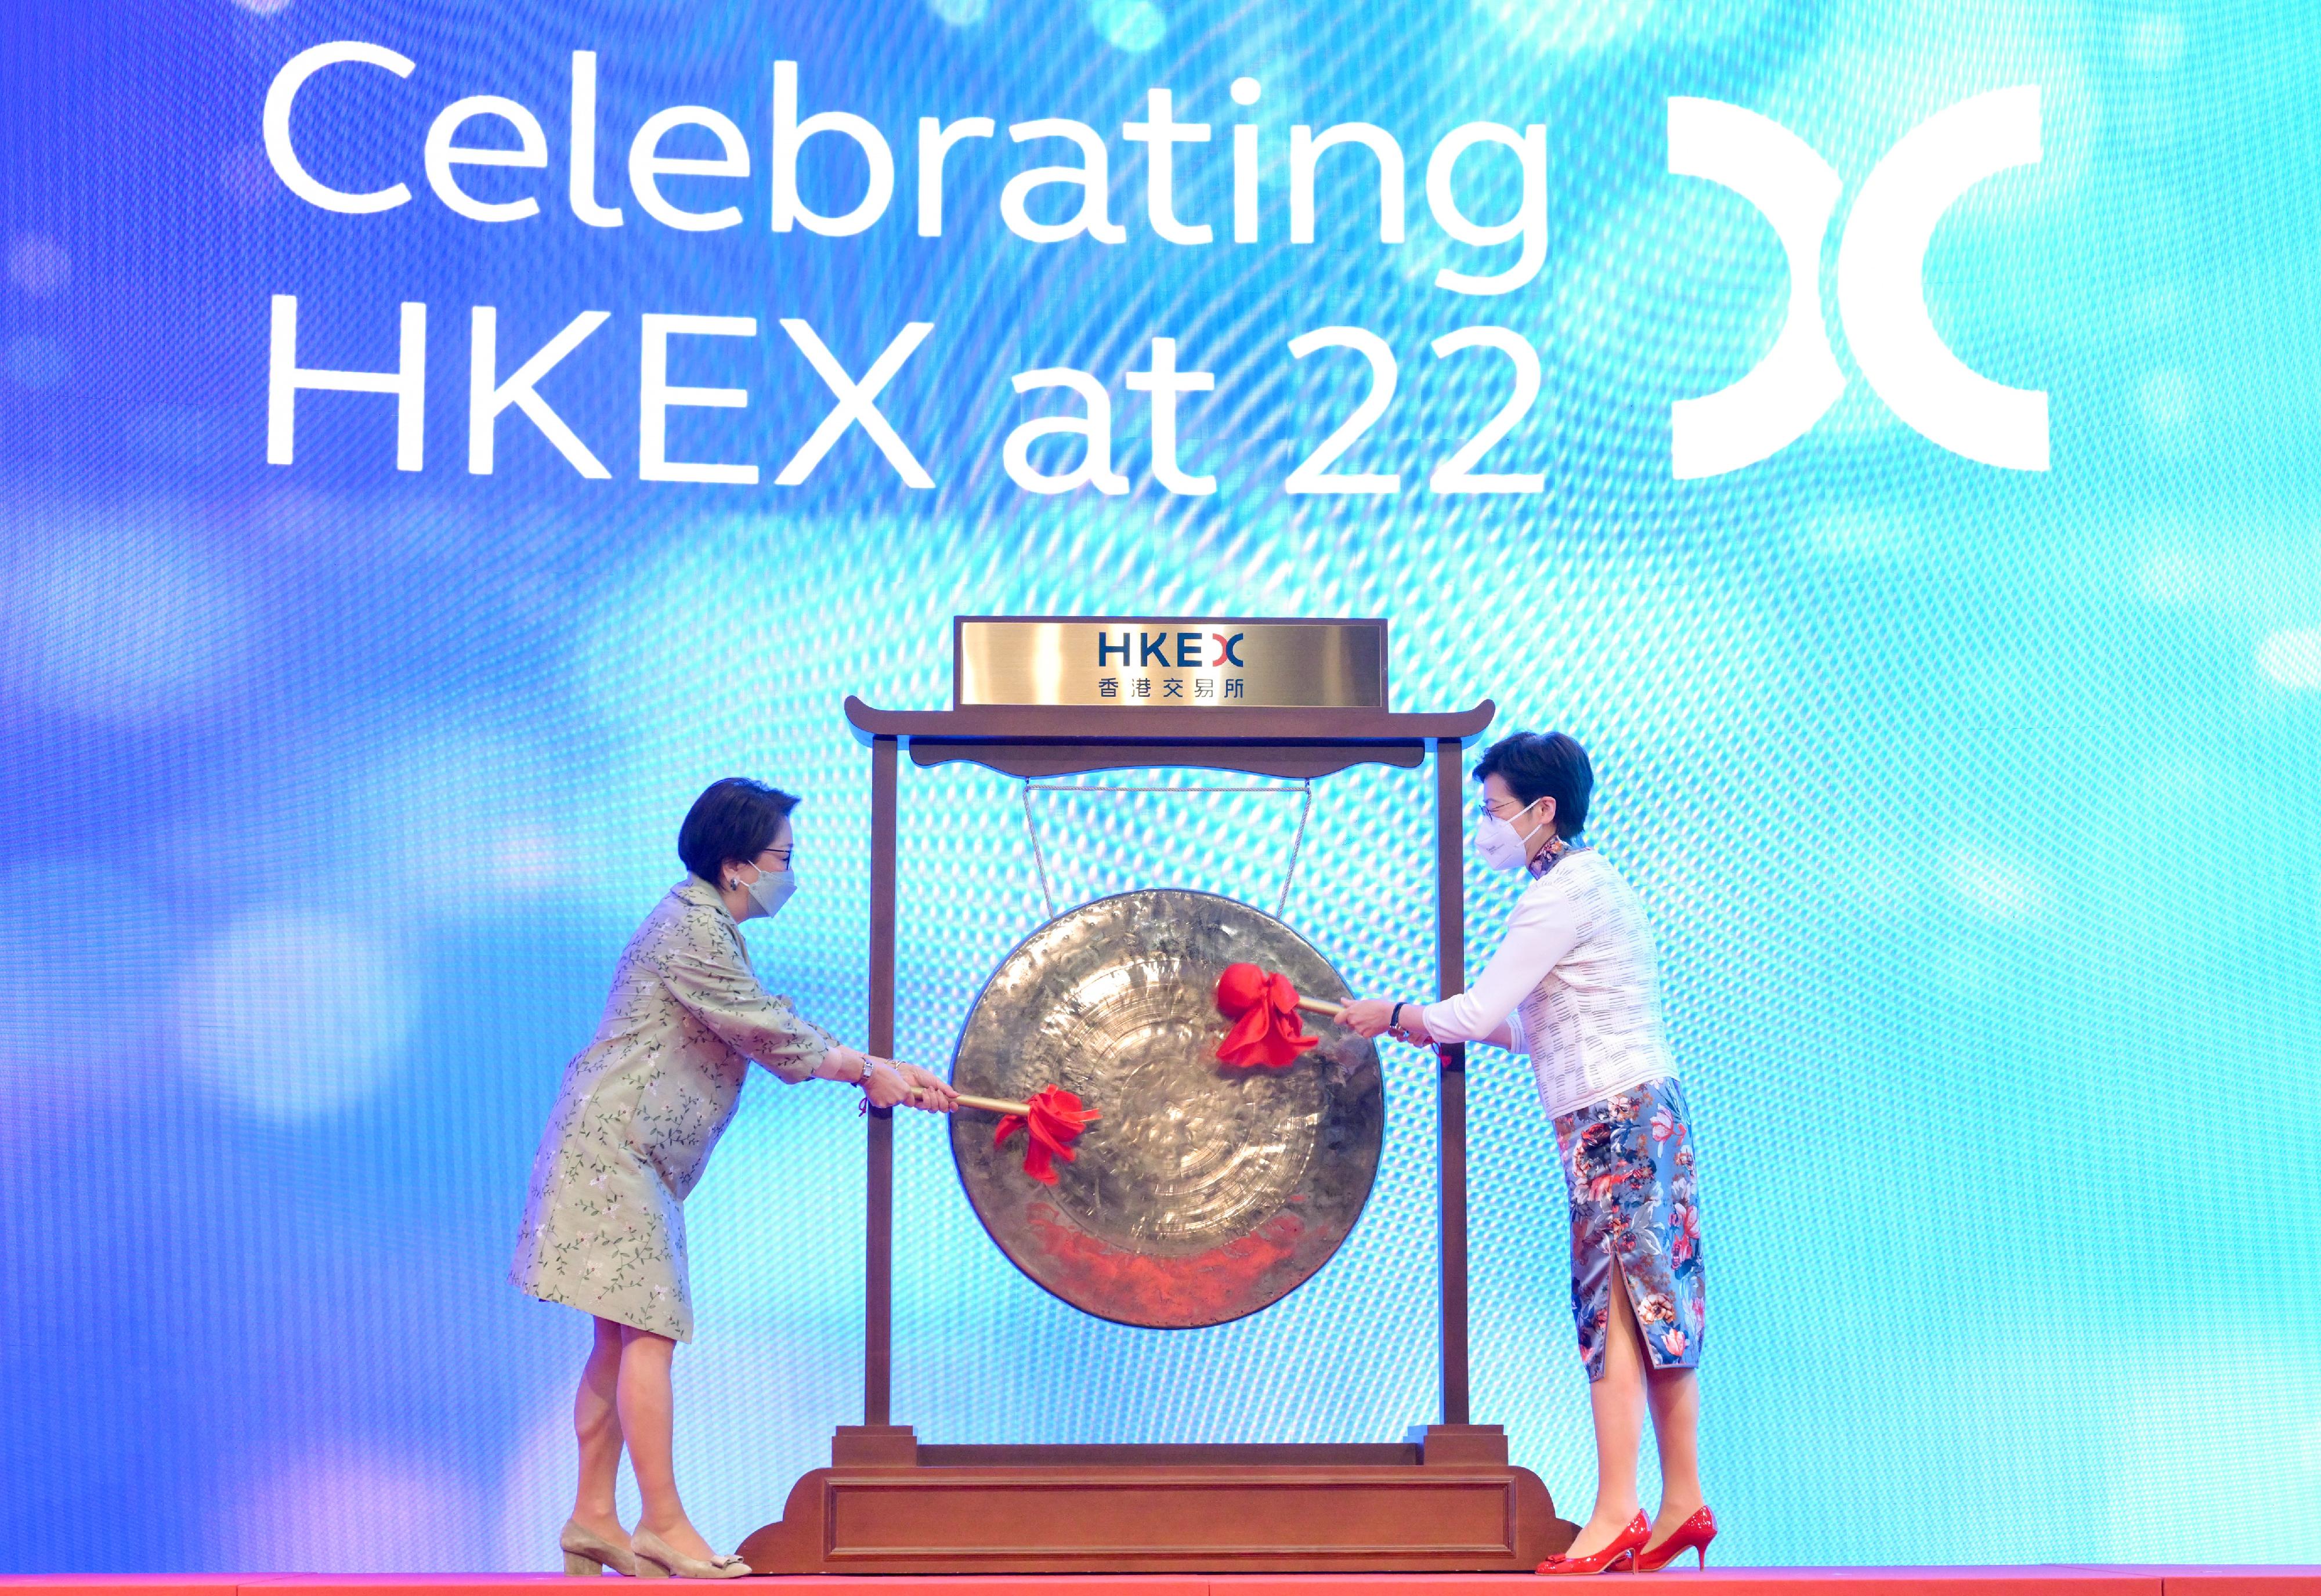 The Chief Executive, Mrs Carrie Lam, attended the Hong Kong Exchanges and Clearing Limited (HKEX) 22nd Anniversary Celebrations today (June 21). Photo shows Mrs Lam (right) and the Chairman of the HKEX, Mrs Laura Cha (left), officiating at the gong striking ceremony.